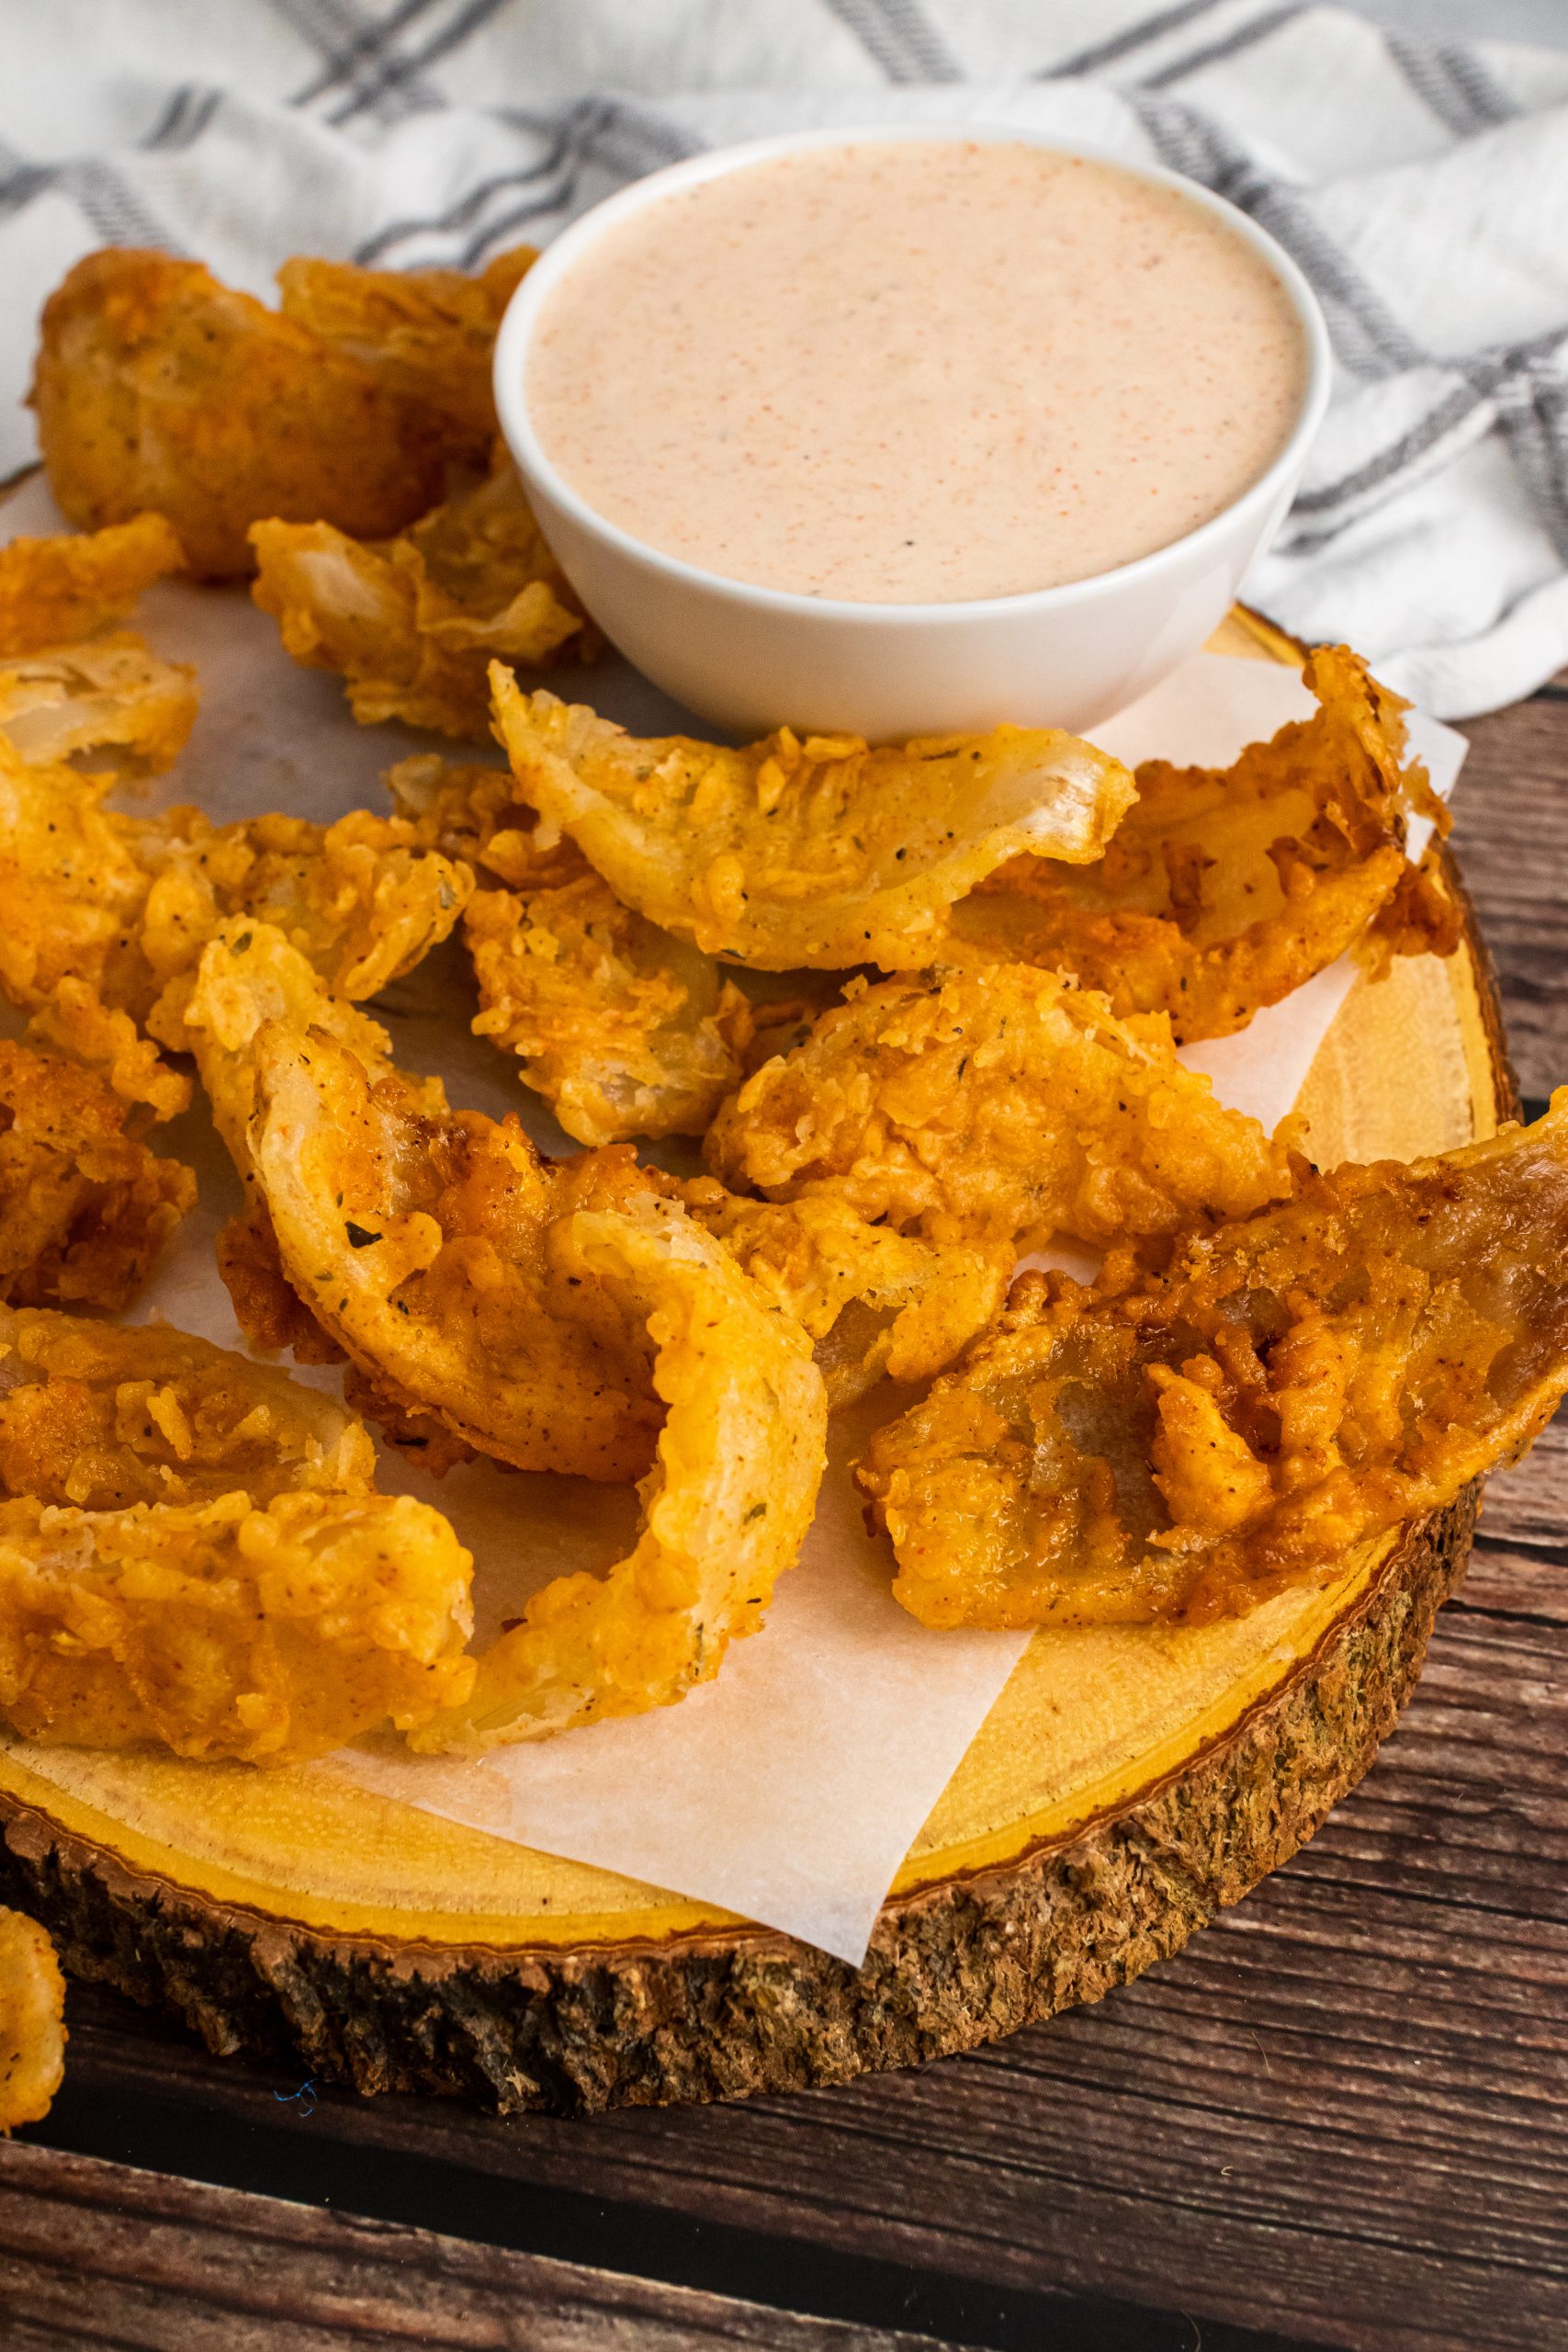 Blooming Onion, side dish, snack